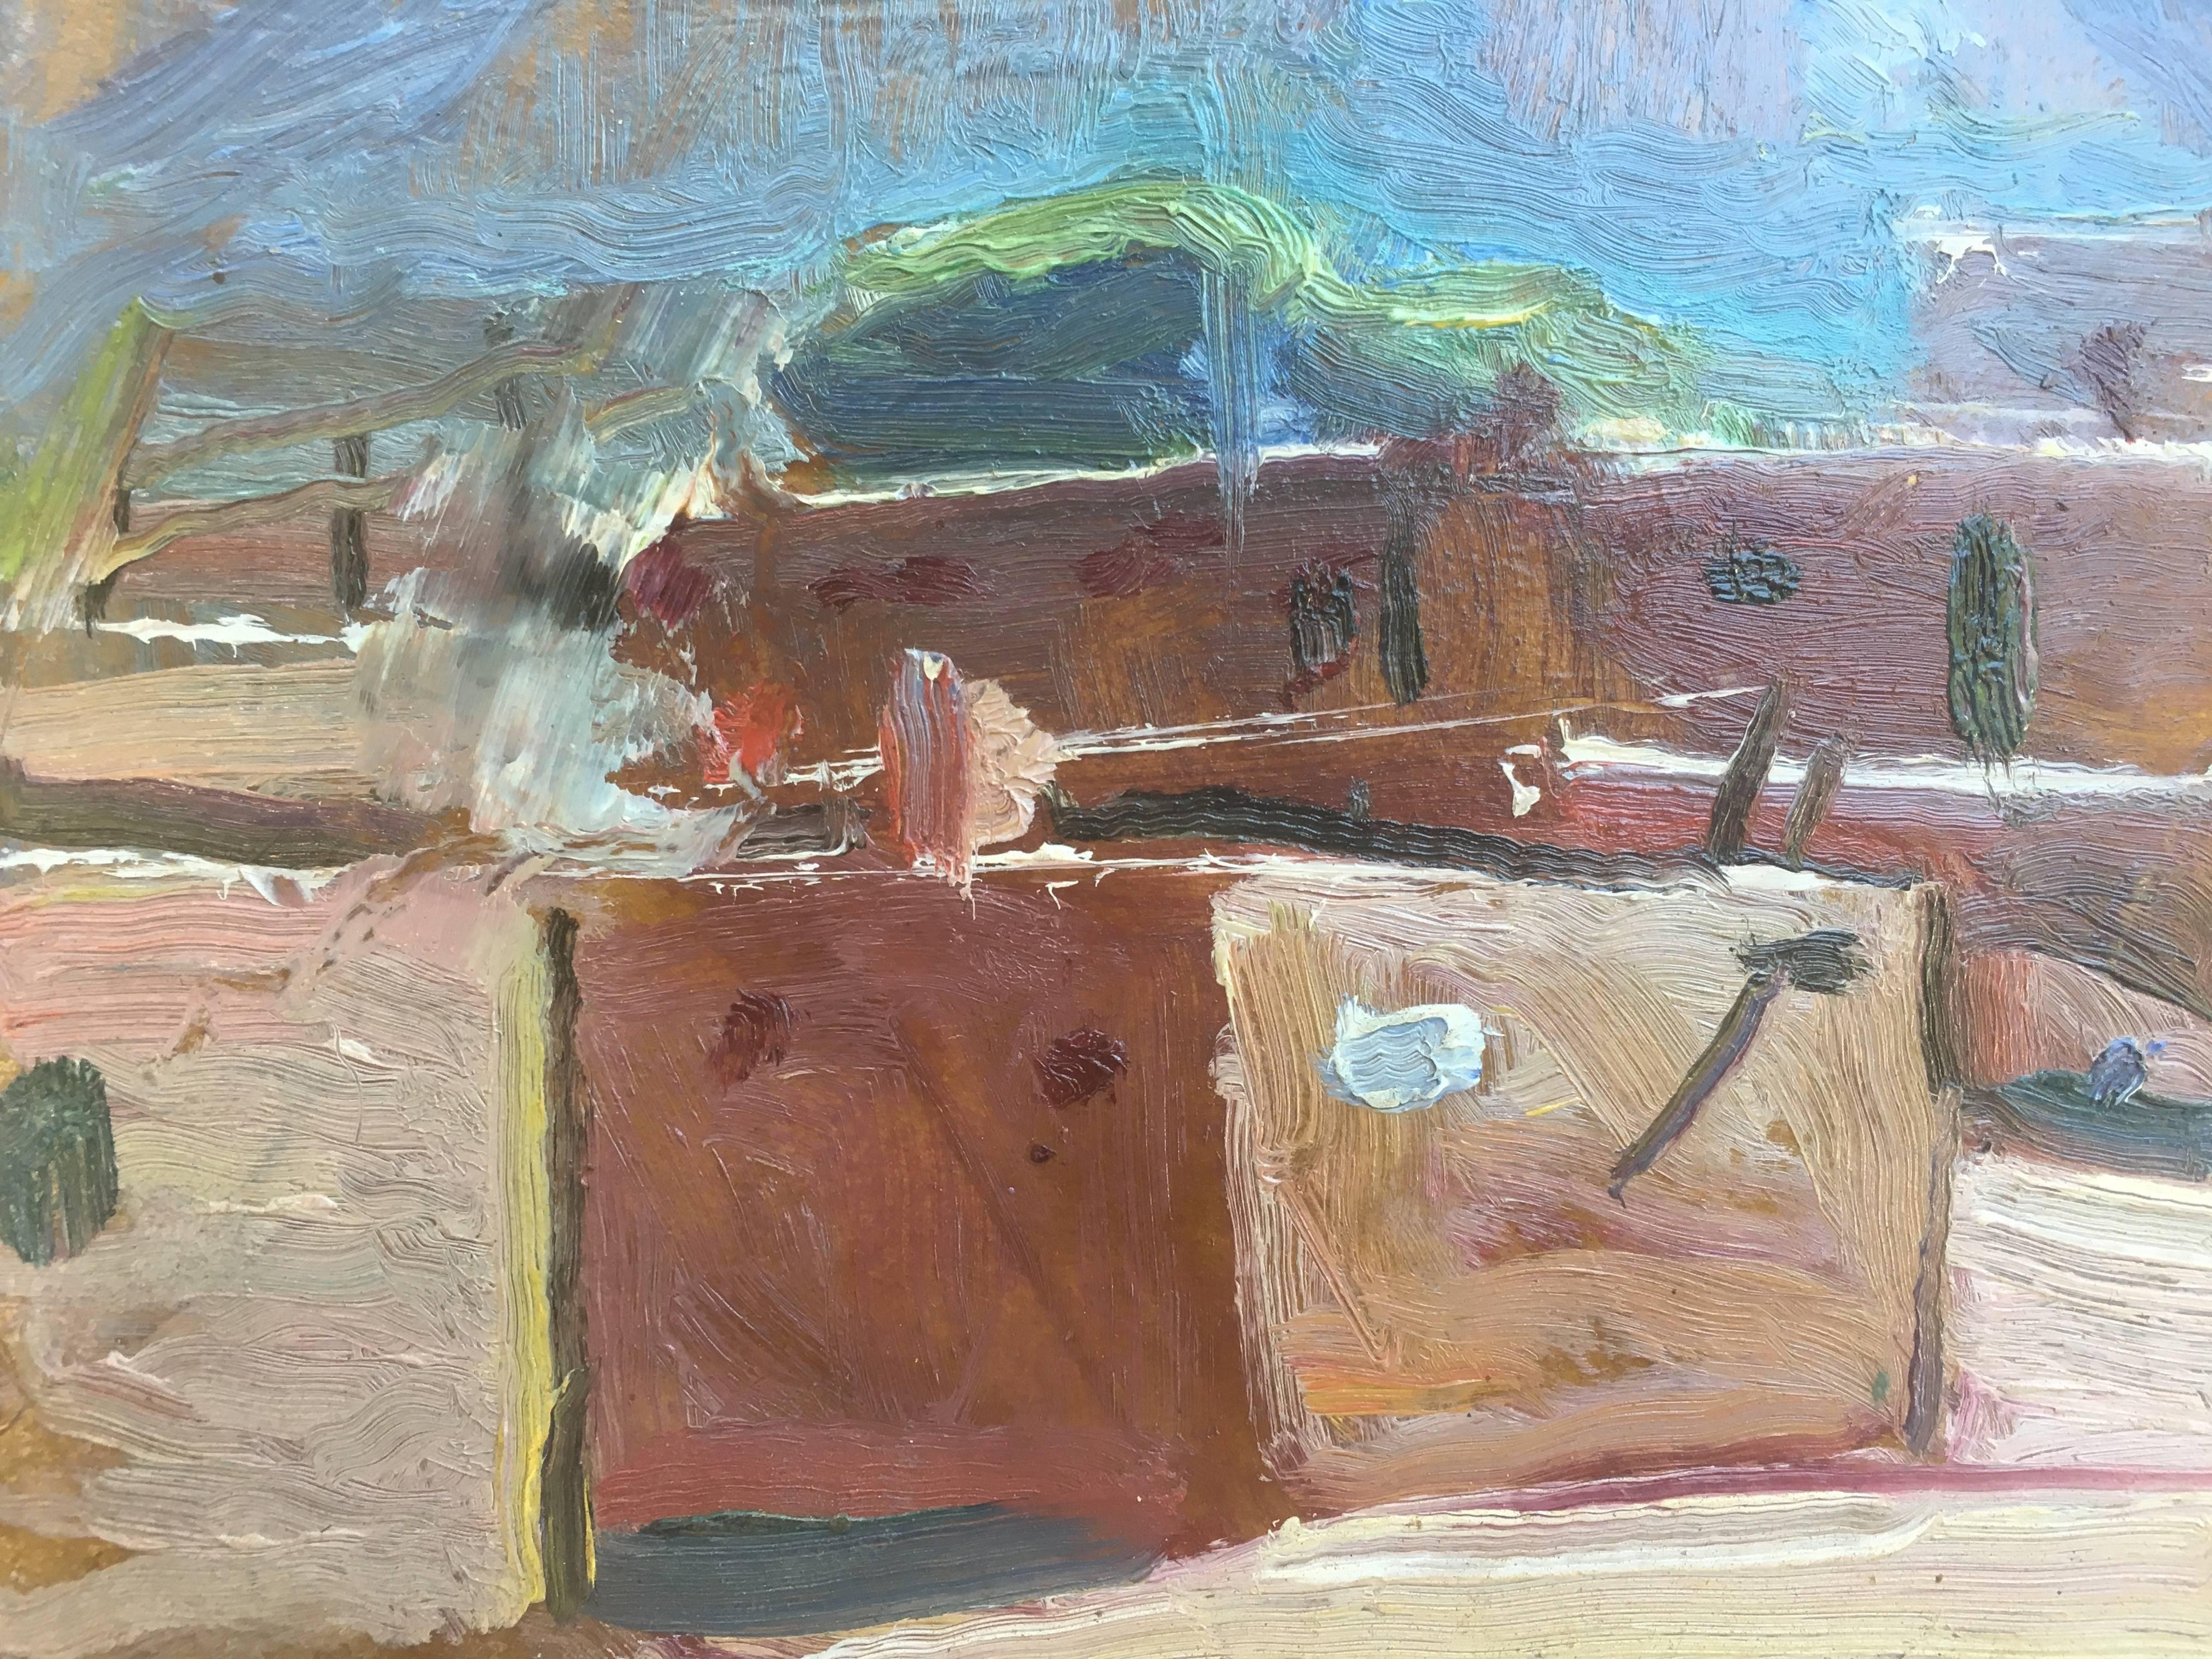 Sun Drenched Pueblo in Taos - Painting by Ruth Peabody